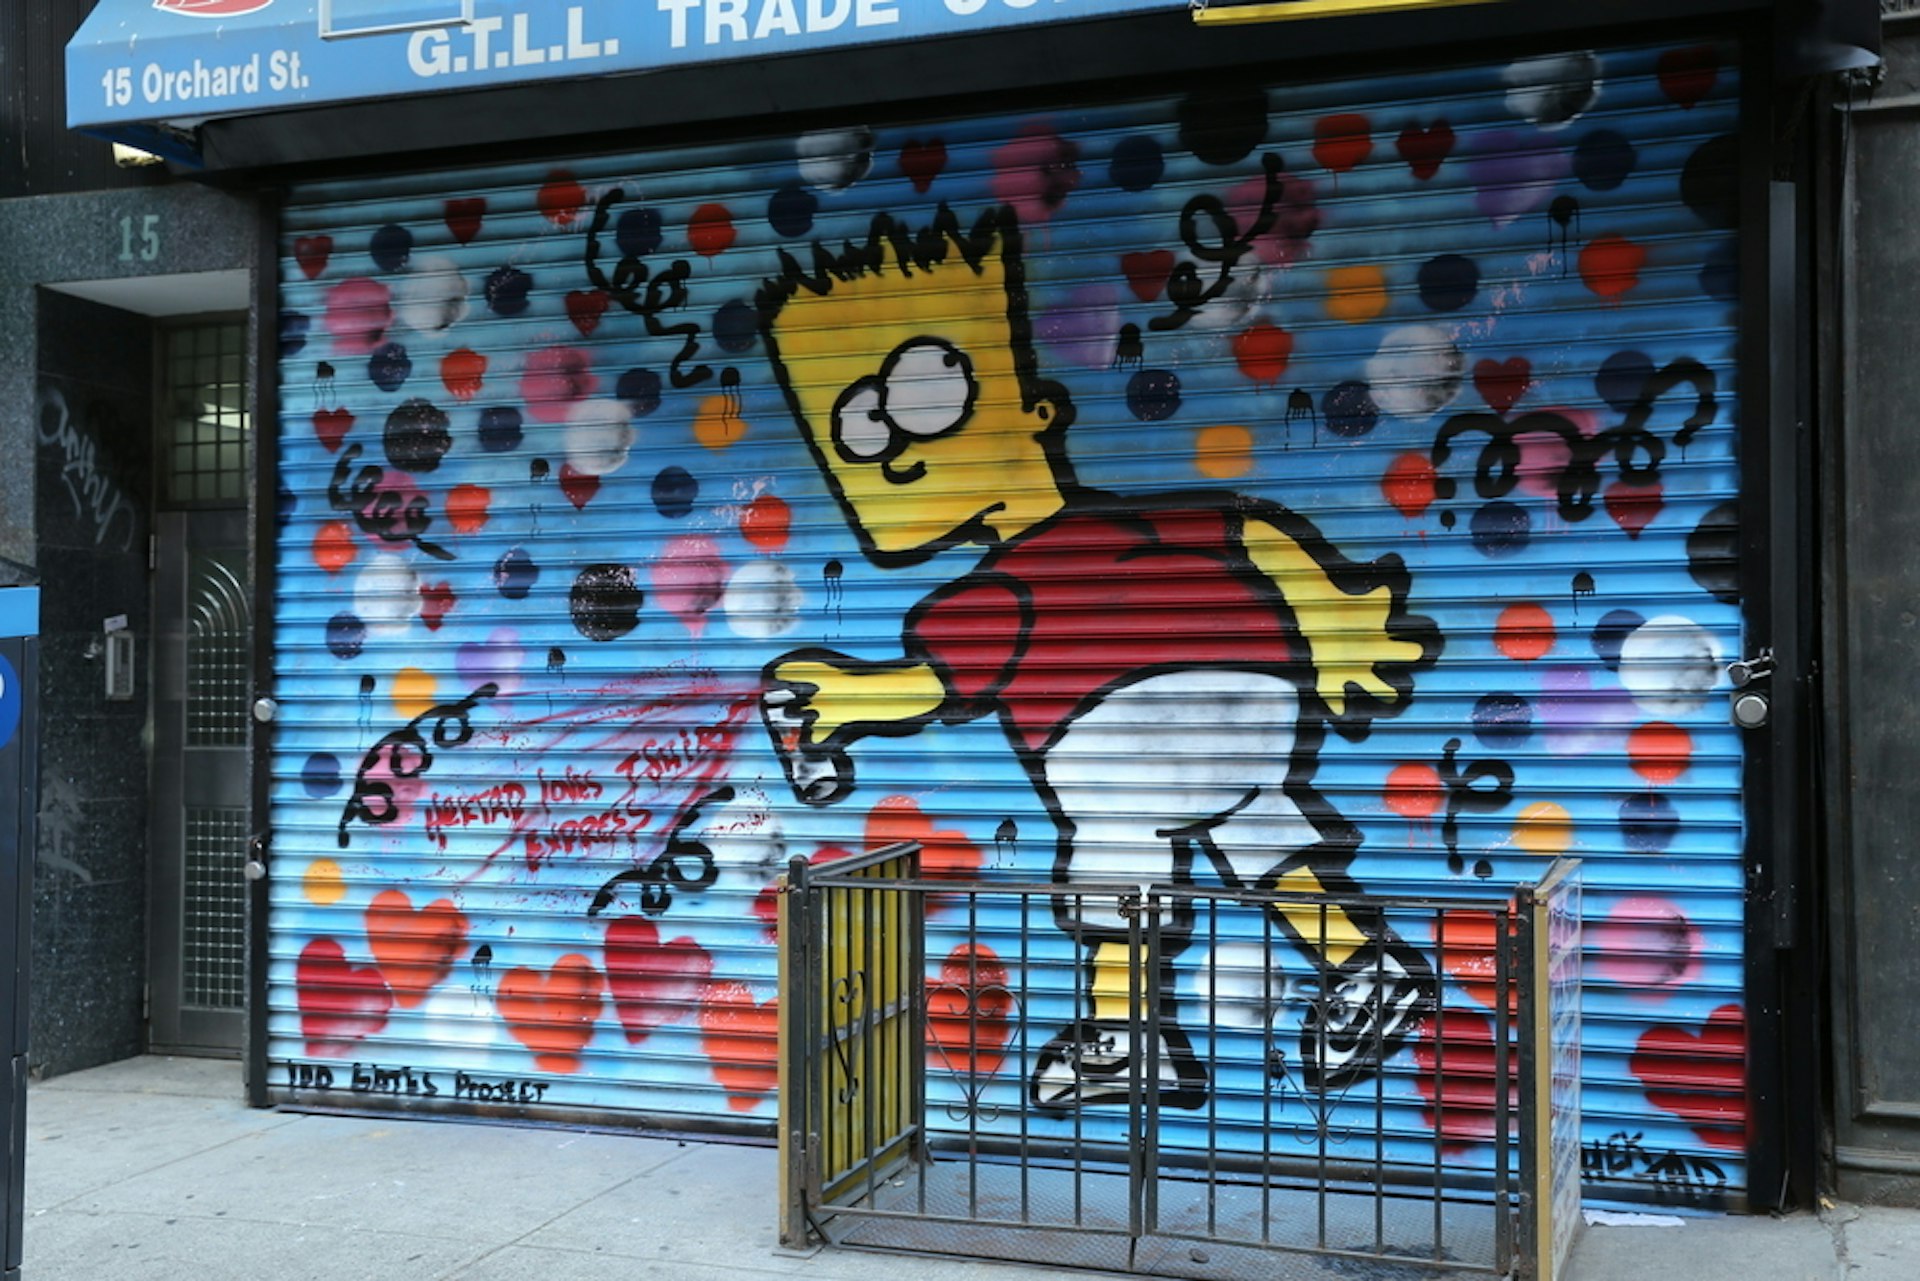 Artists give the Lower East Side a makeover by revamping old shopfronts